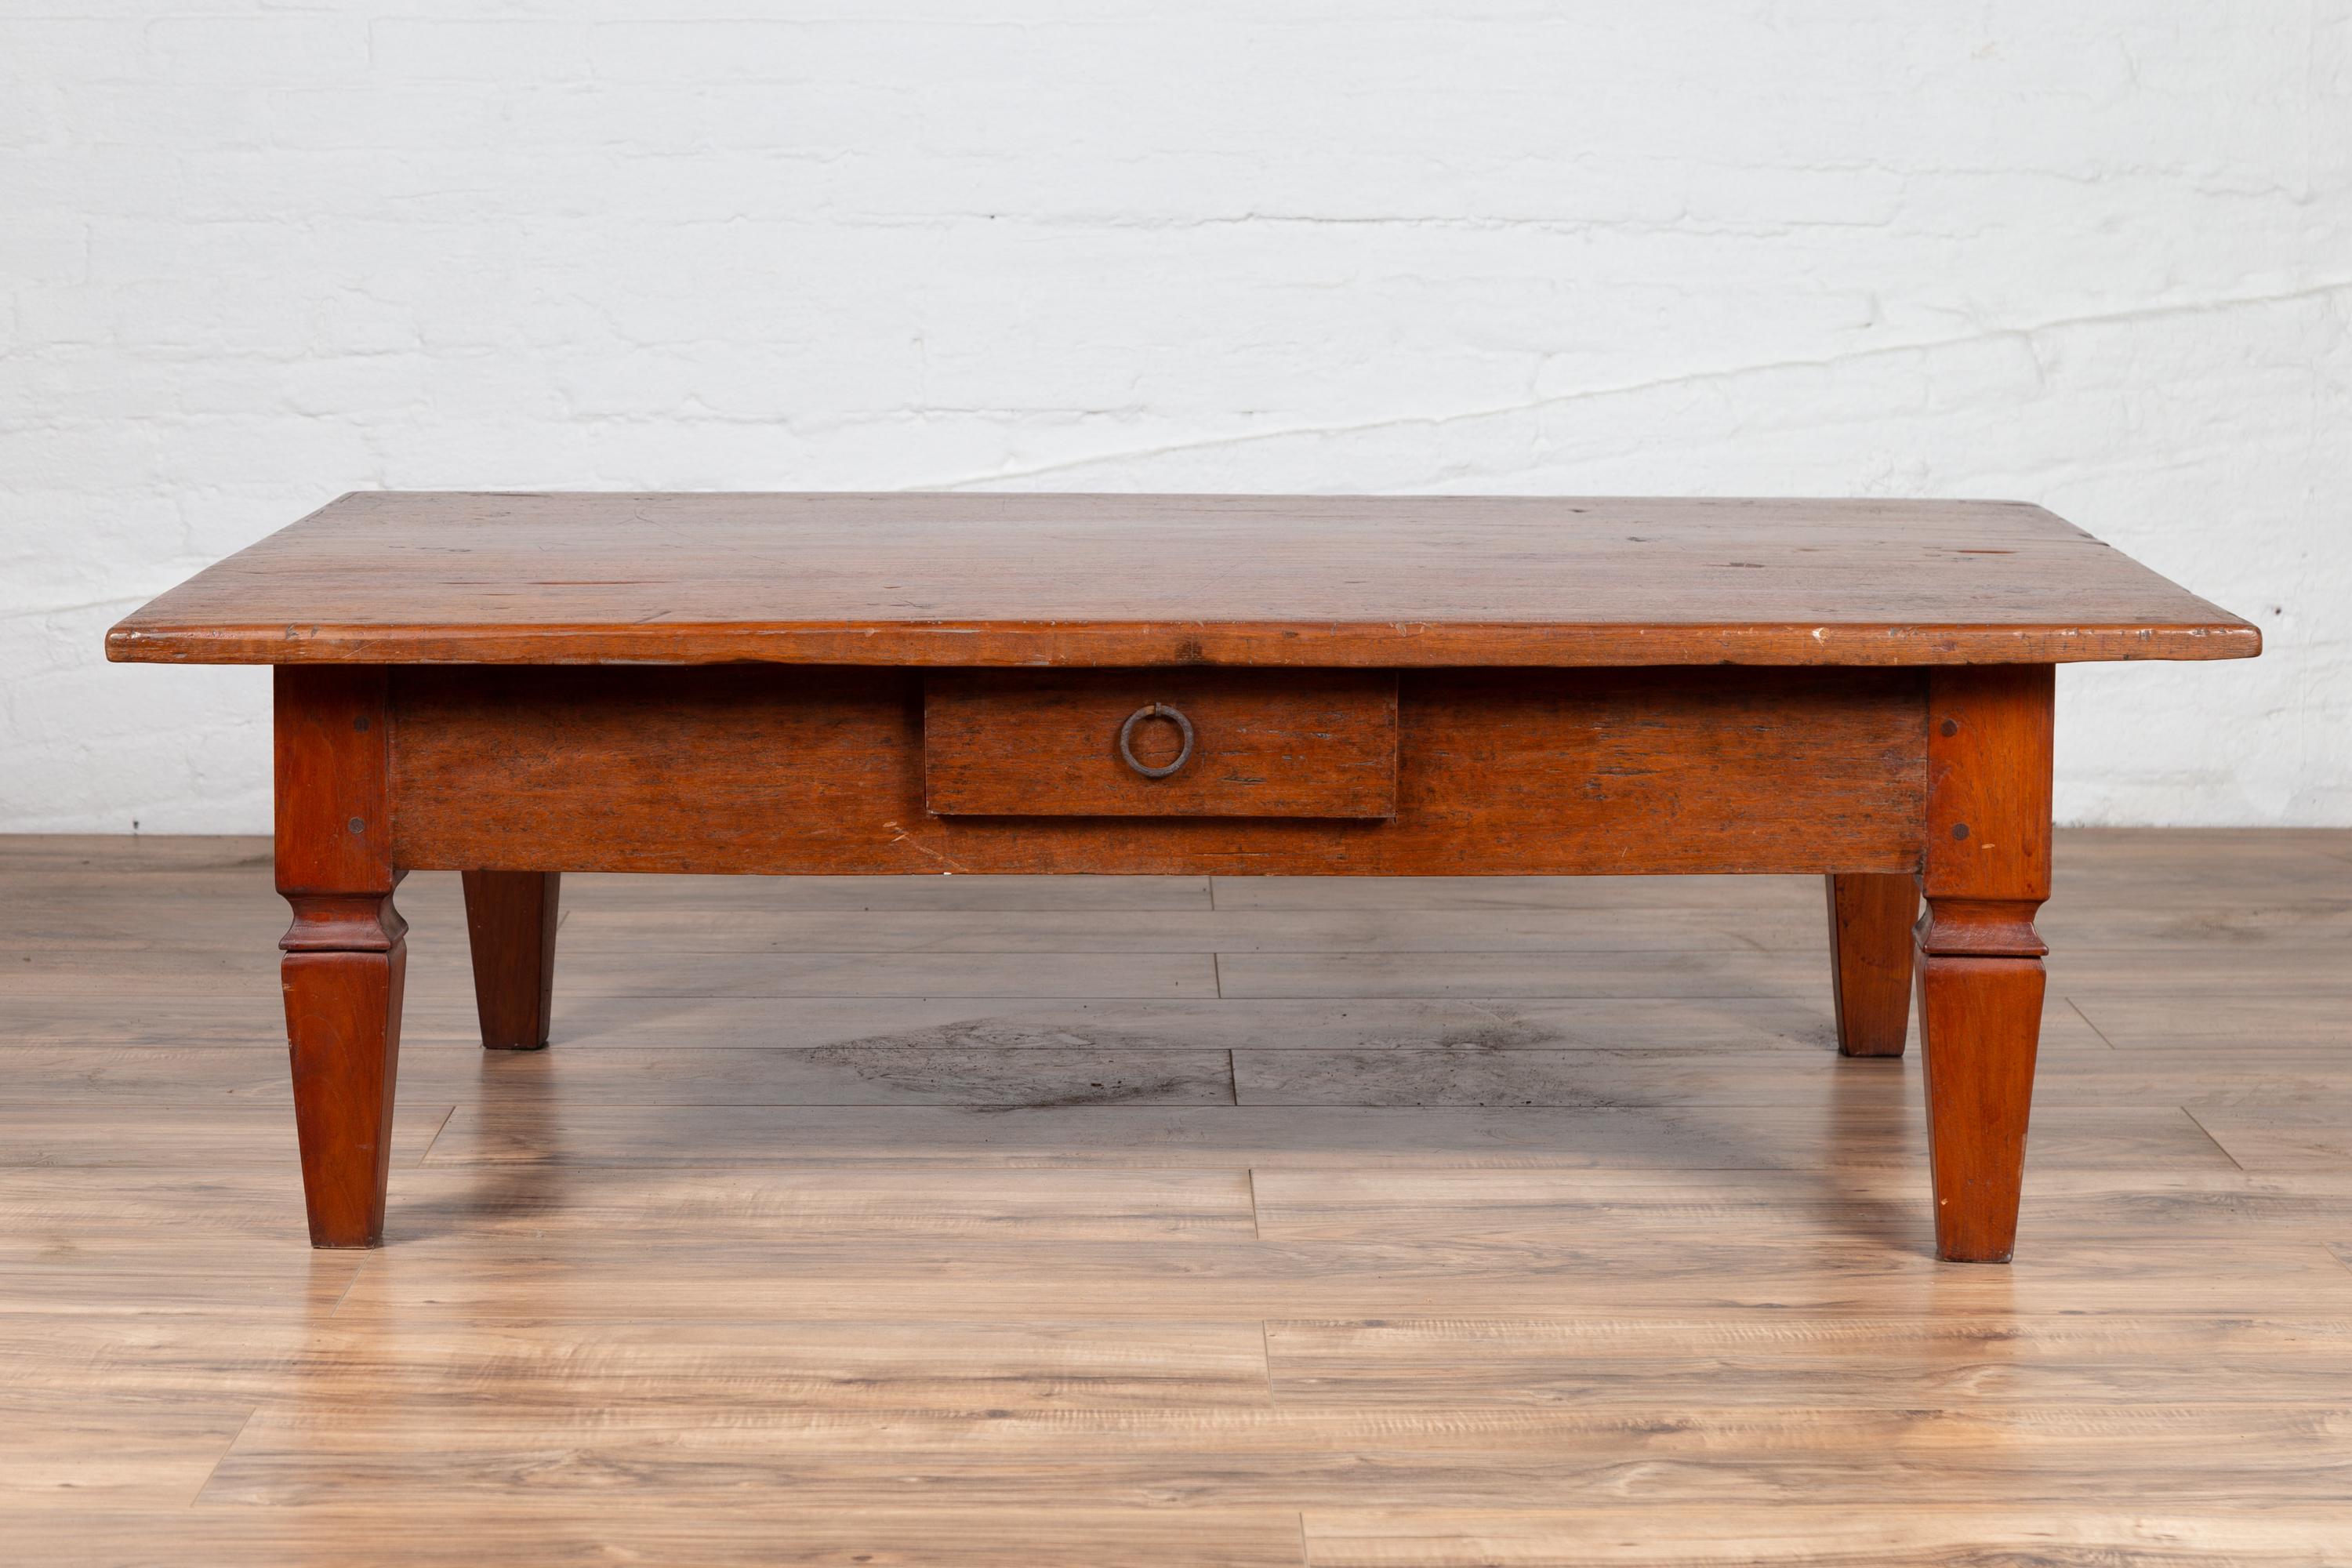 Indonesian Early 20th Century Javanese Coffee Table with Single Drawer and Tapered Legs